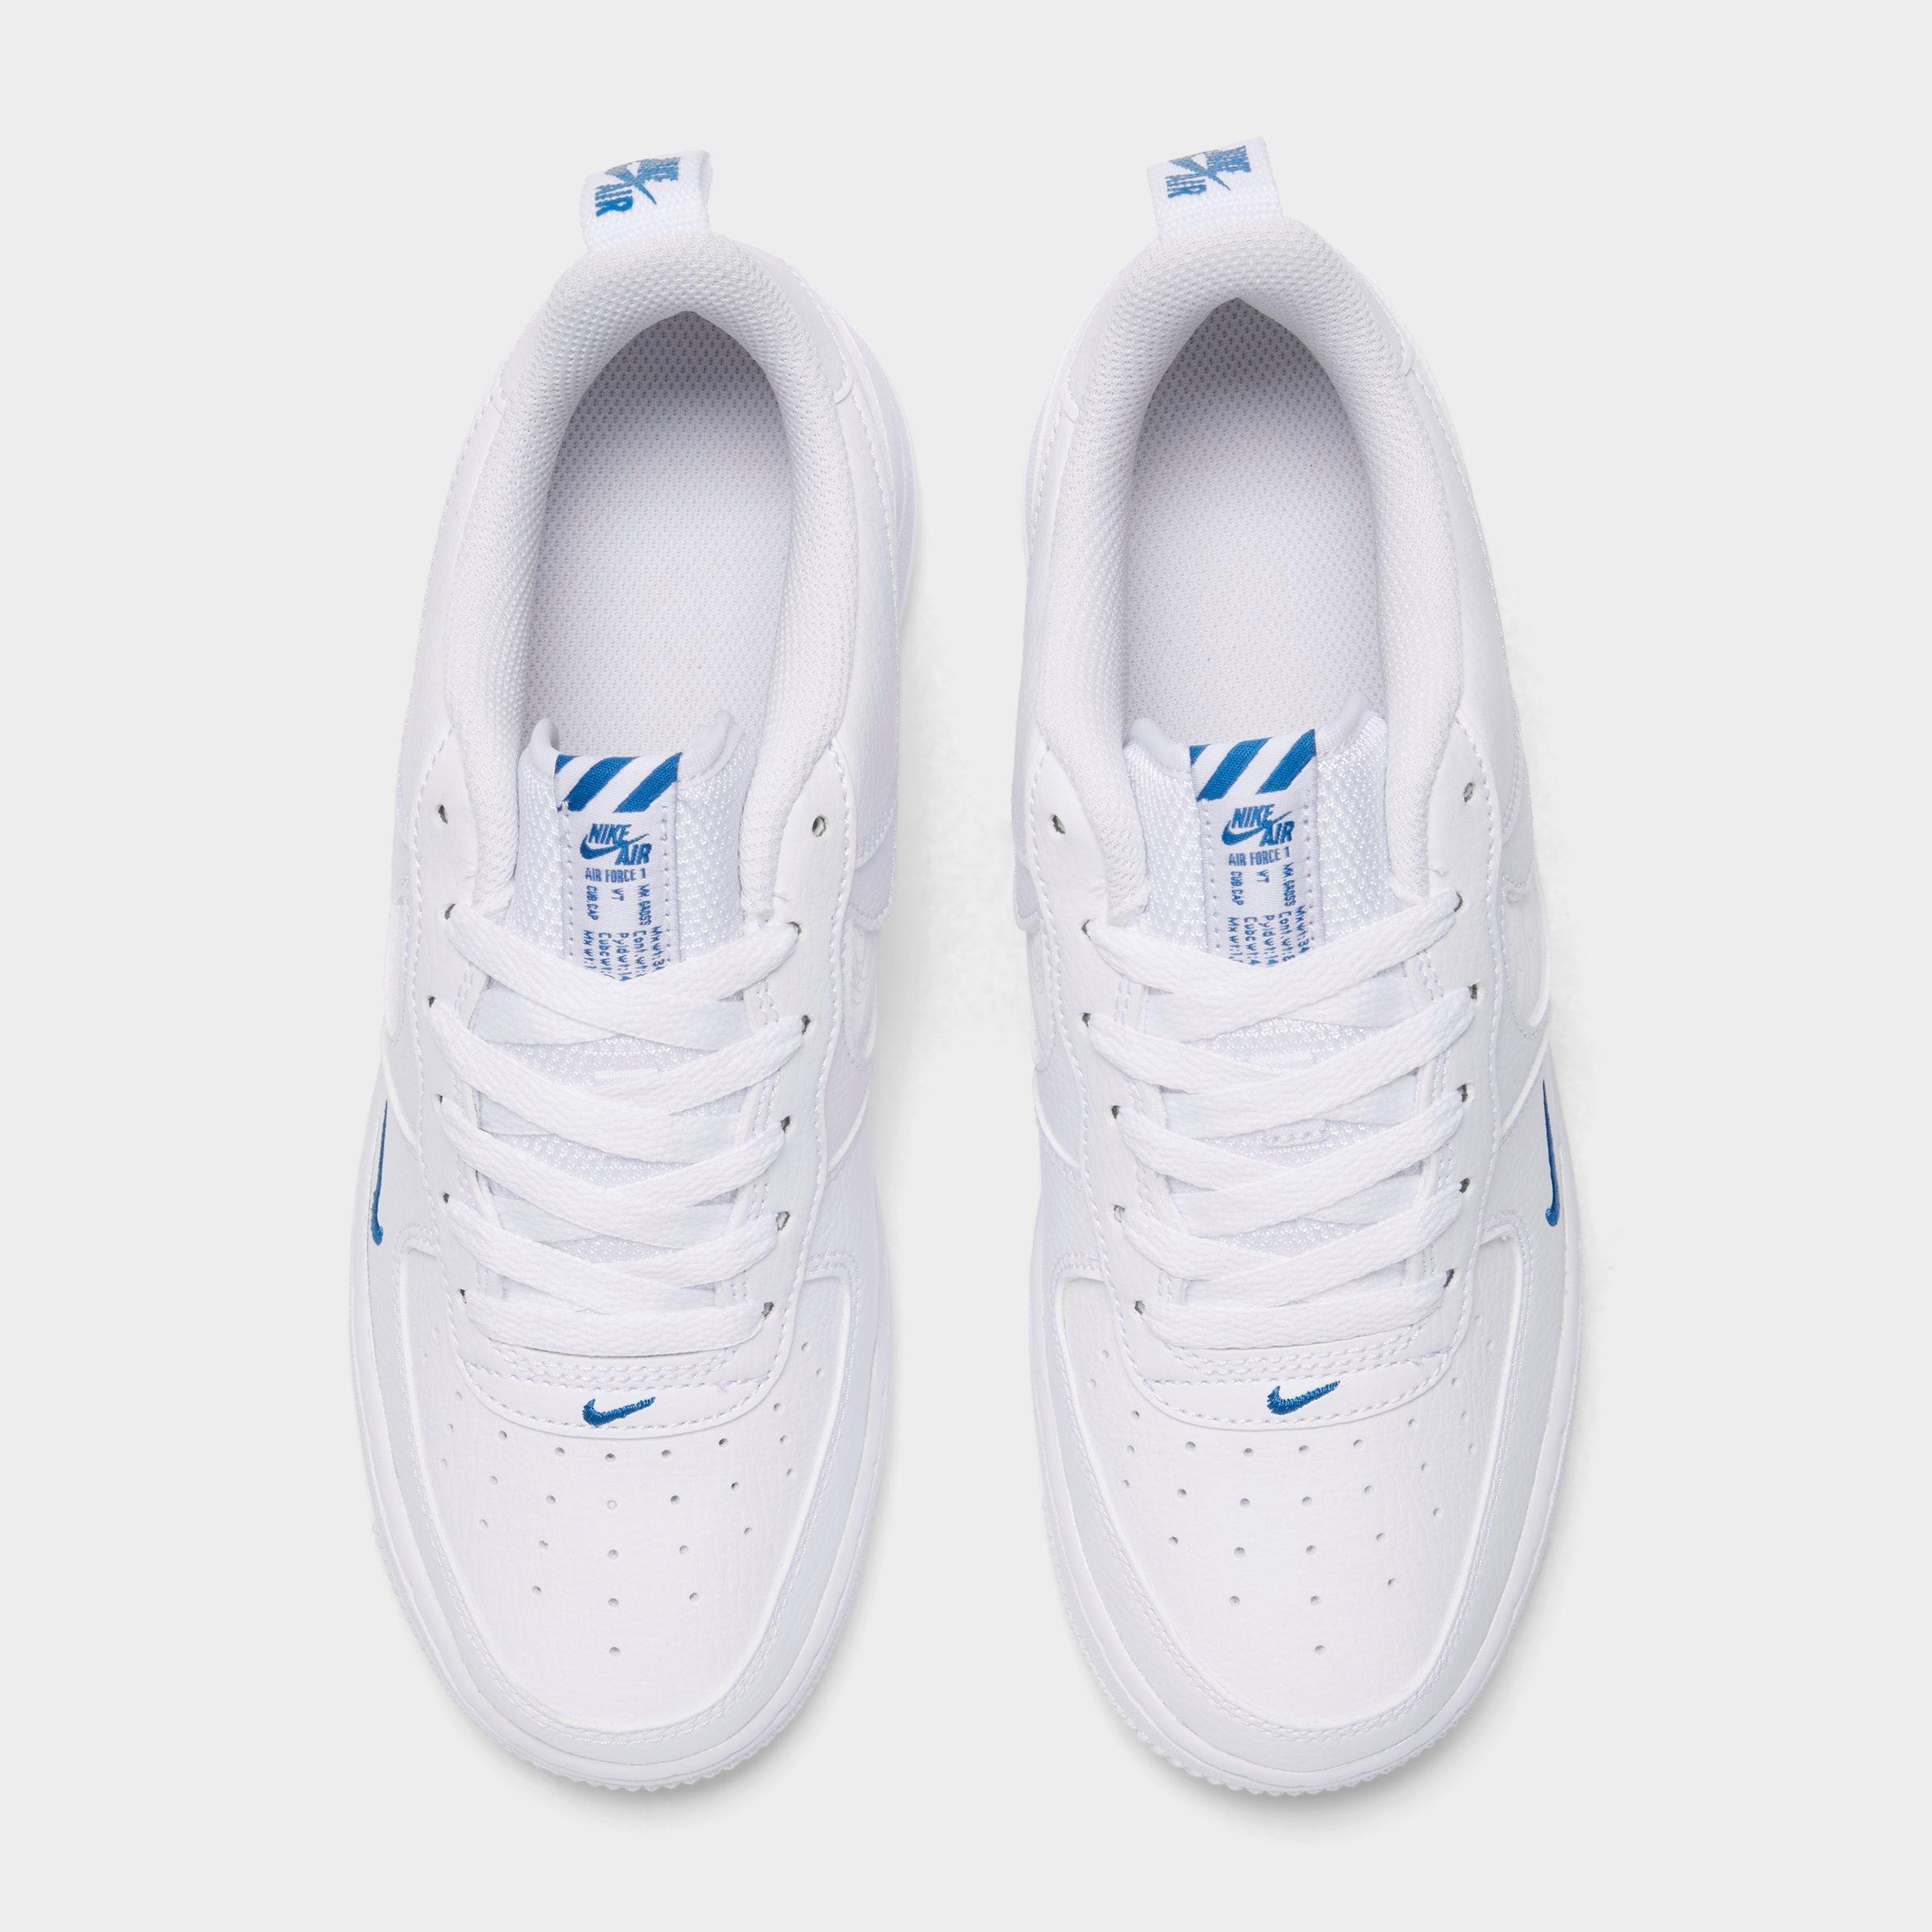 nike white & blue air force 1 lv8 3 trainers youth